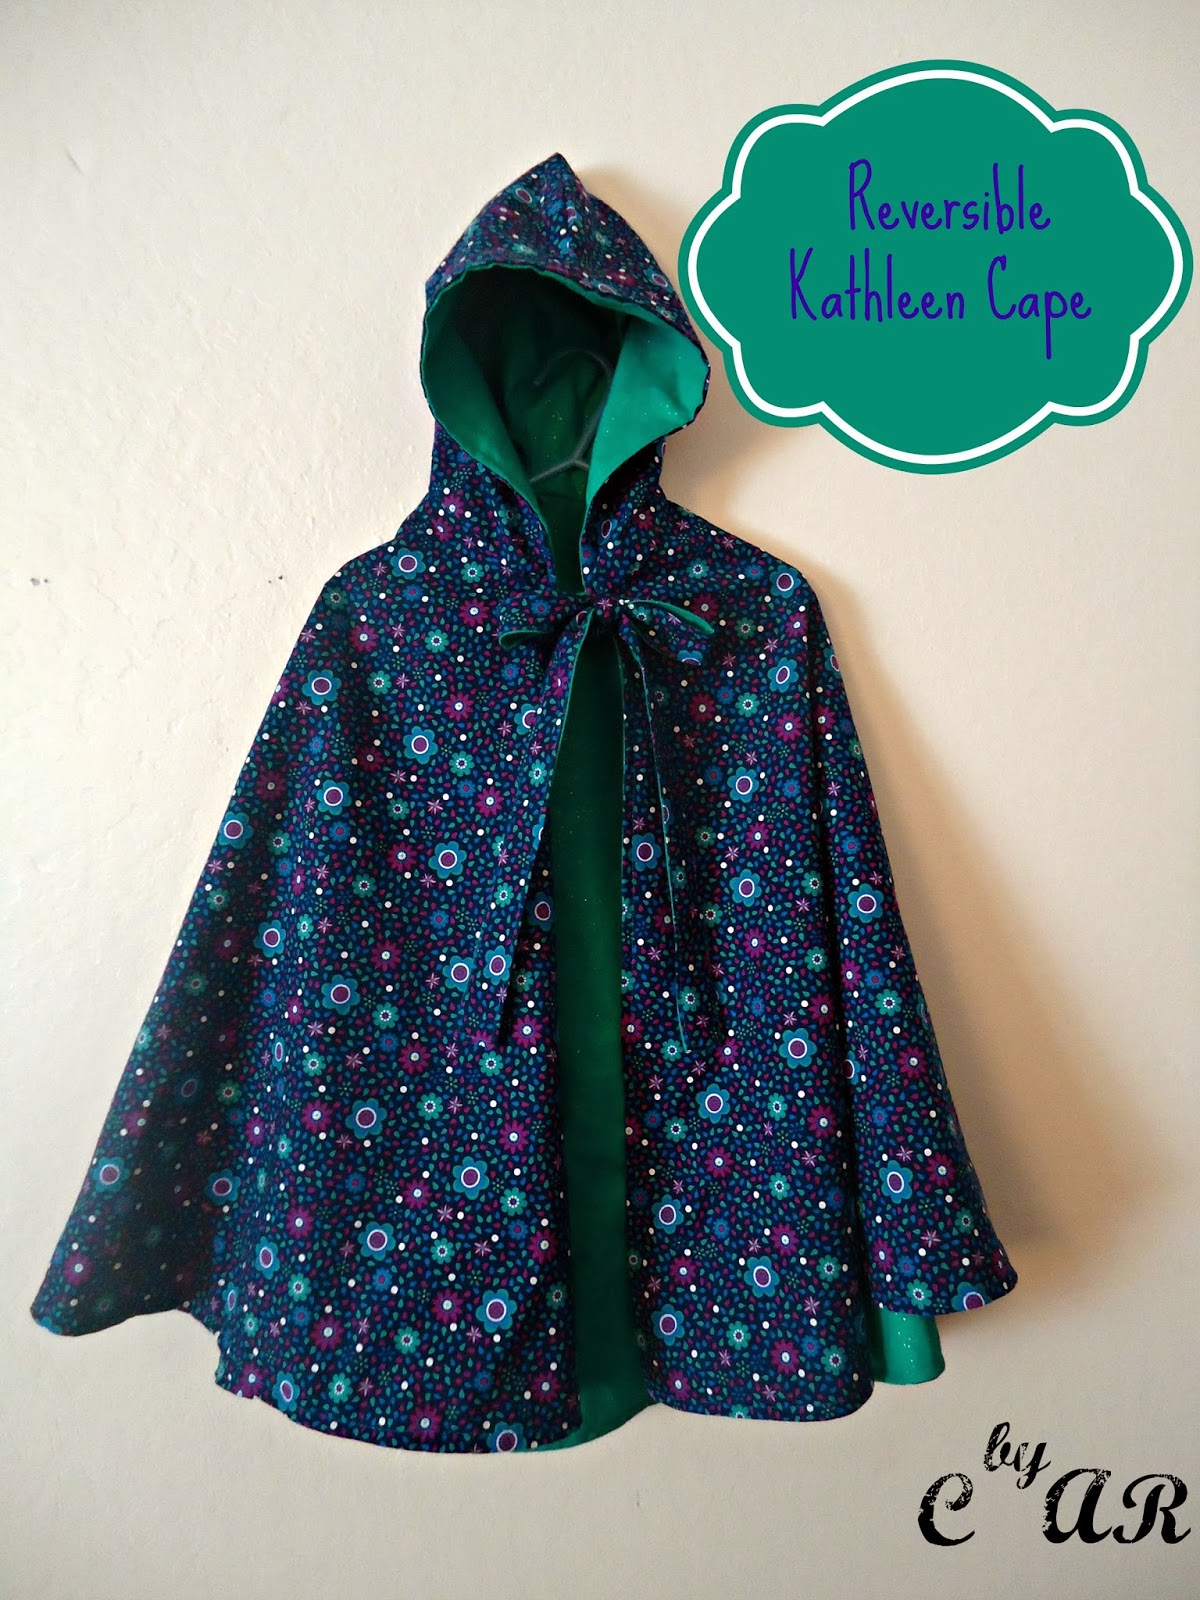 Creations by Alisha Rose: The Reversible Kathleen Cape